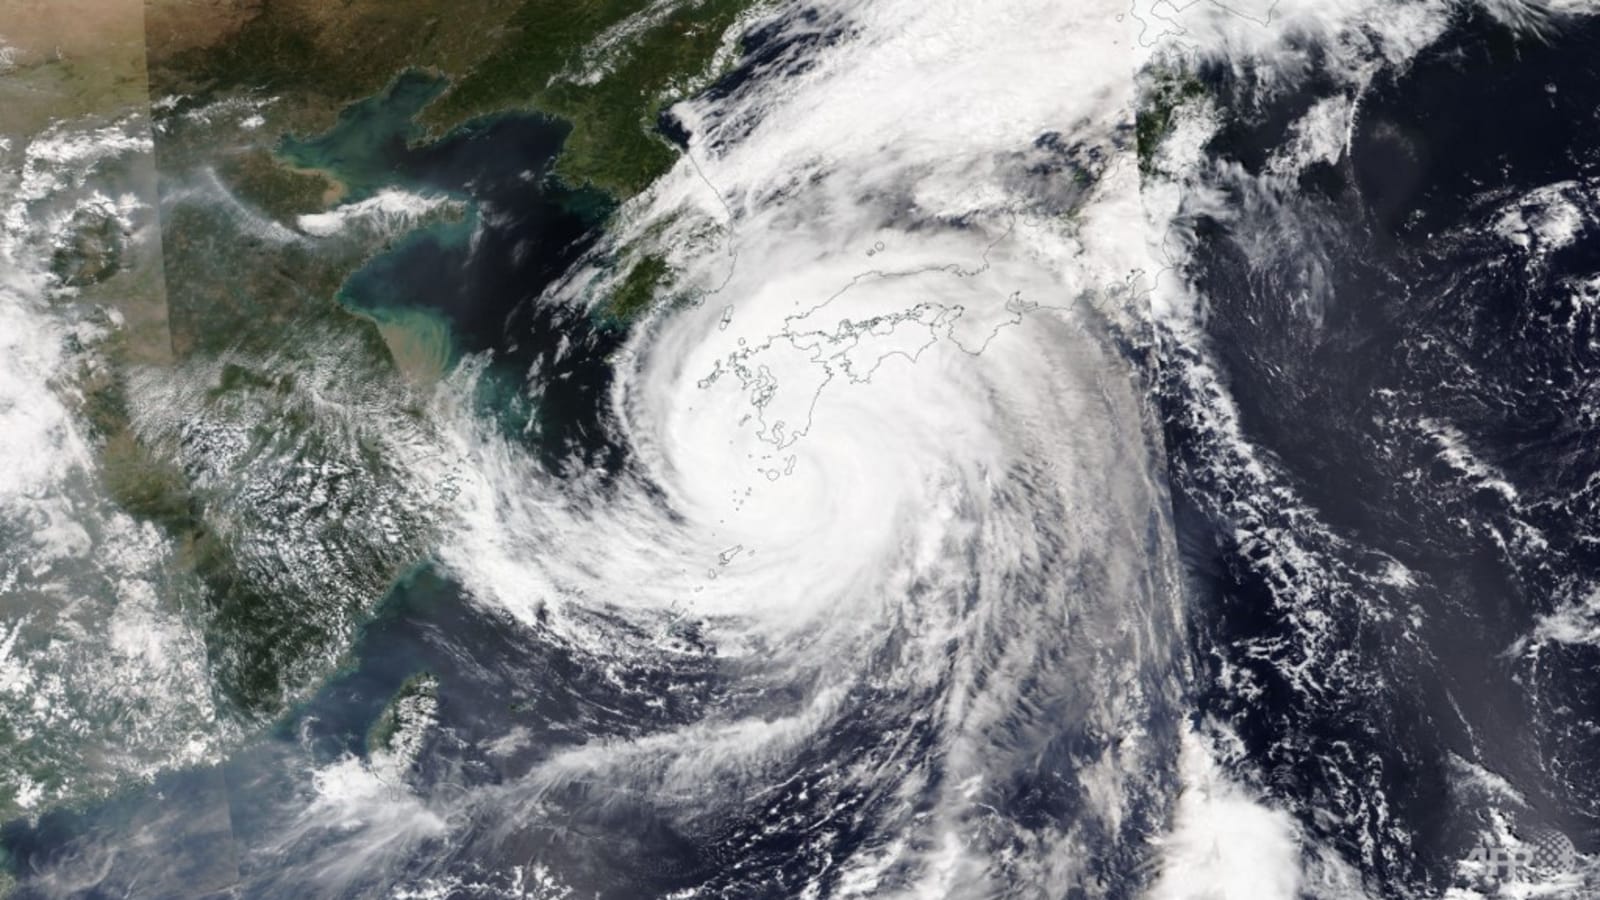 CNA Explains: Everything you need to know about typhoons and hurricanes